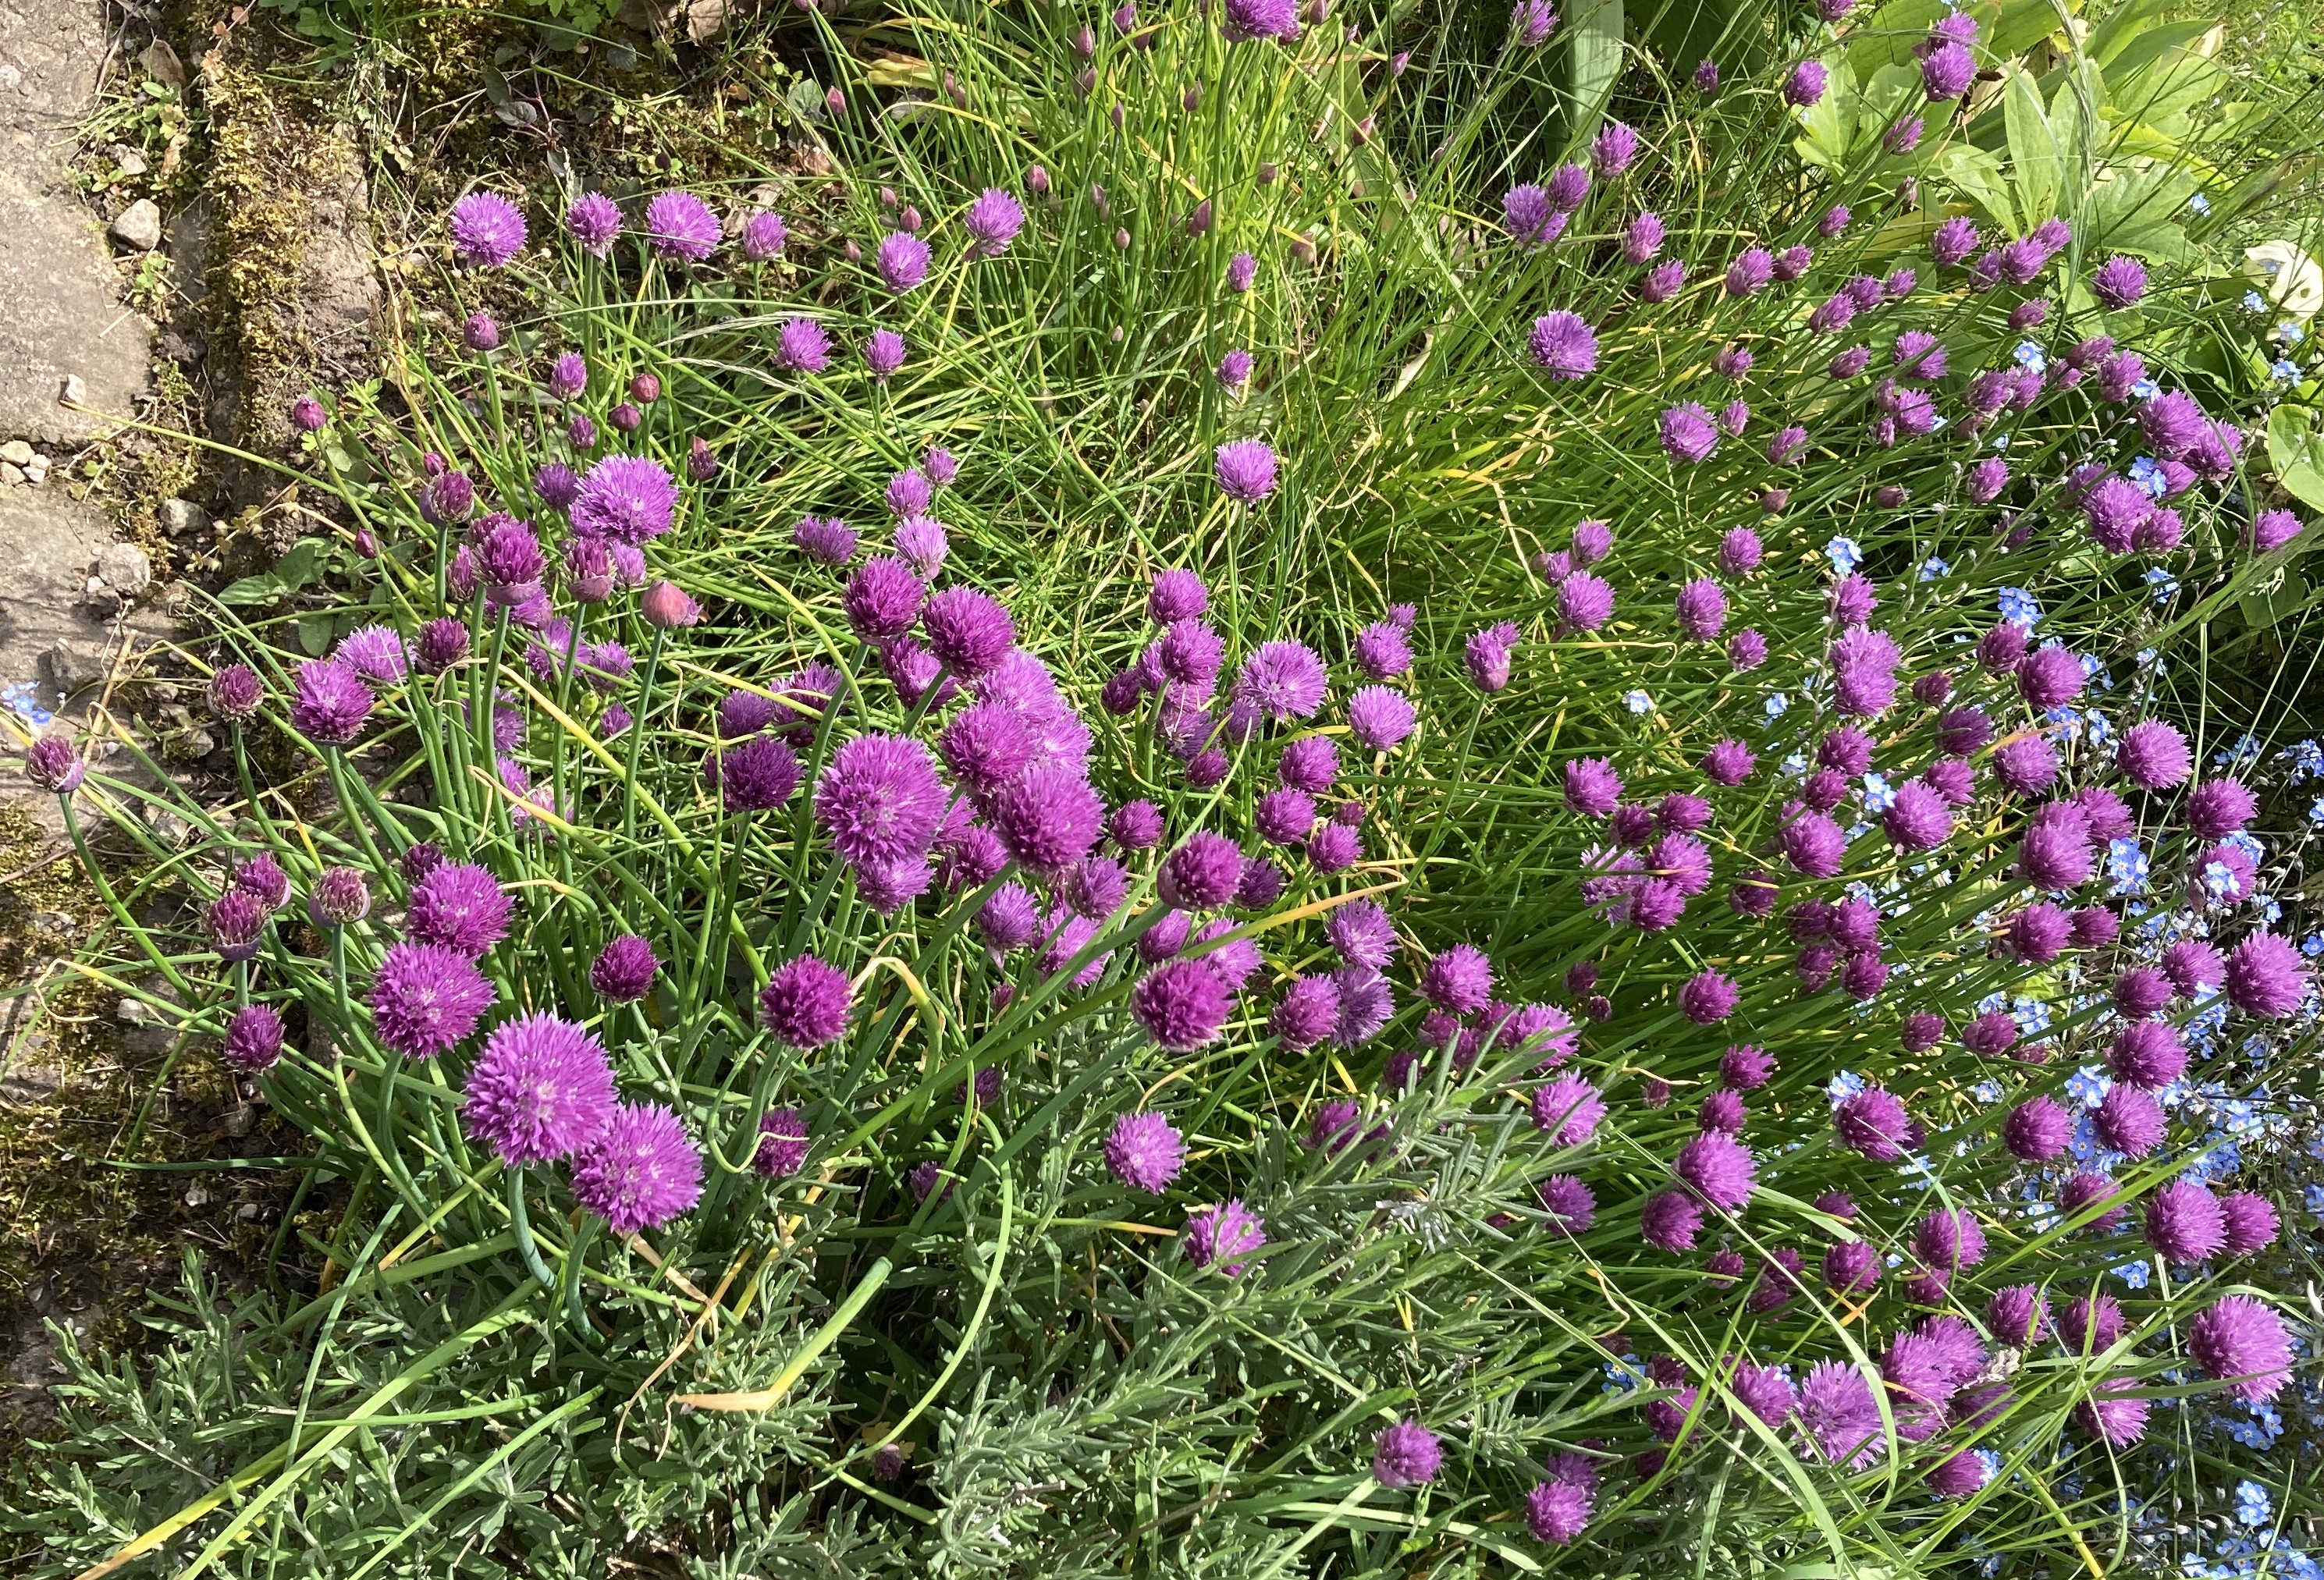 A large drift of chives with lots of purple flowers taking over one corner of the bed.